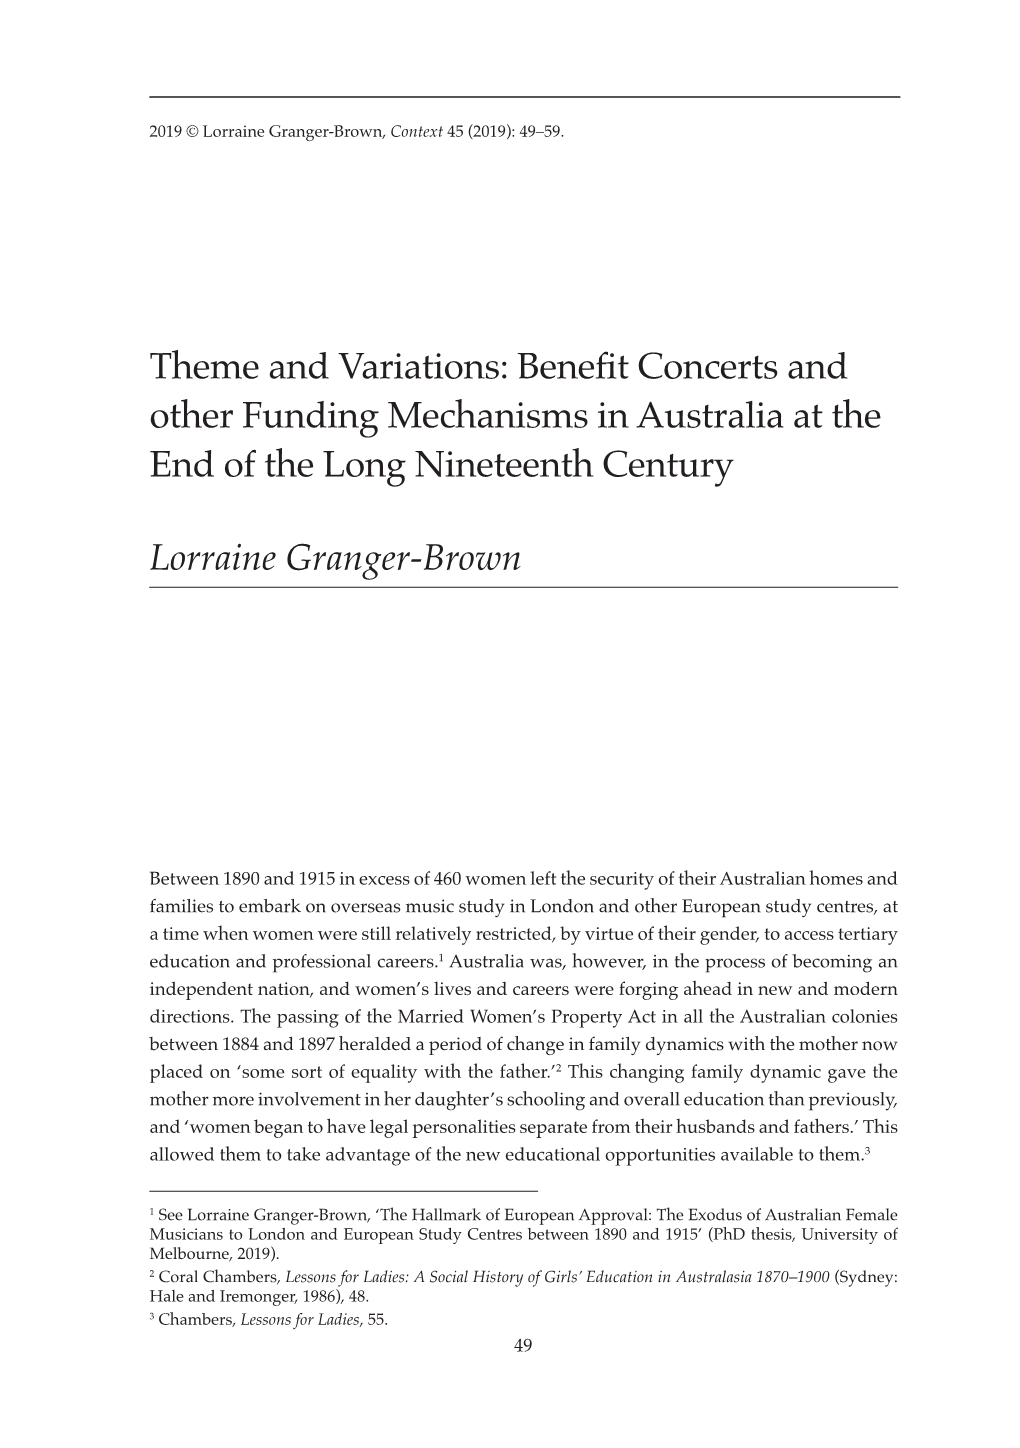 Benefit Concerts and Other Funding Mechanisms in Australia at the End of the Long Nineteenth Century